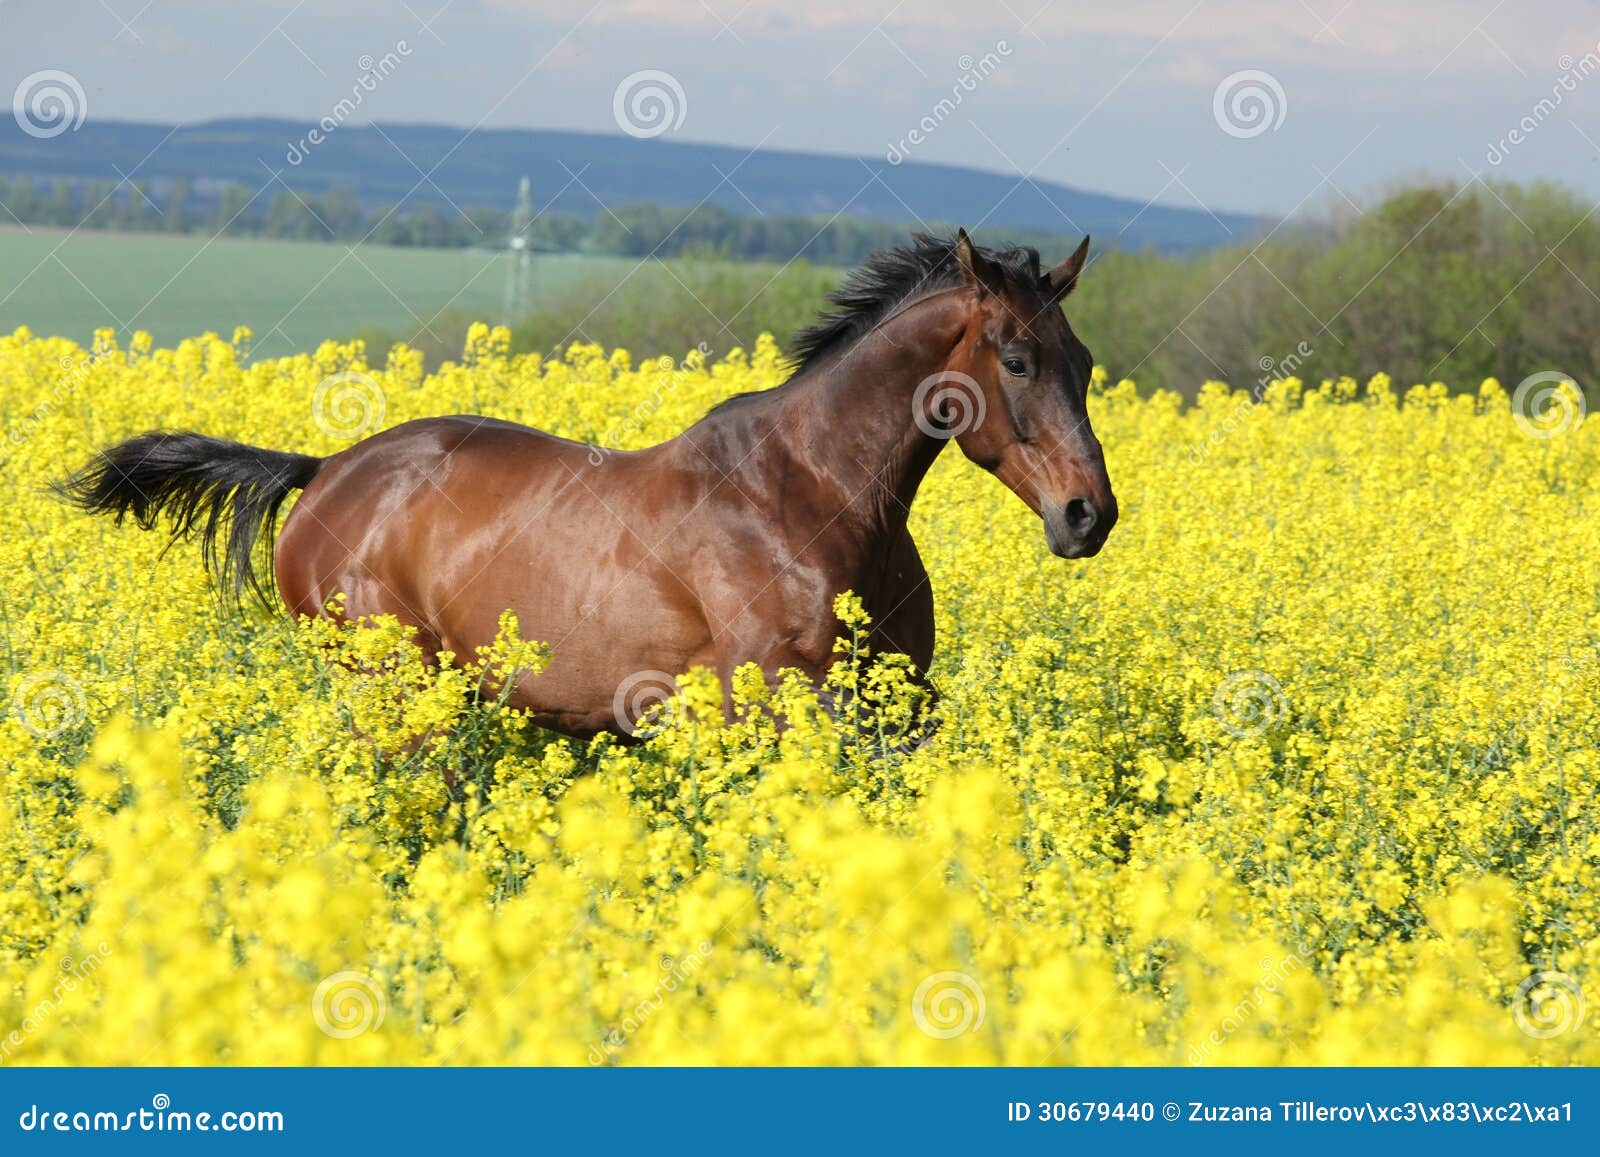 brown horse running in yellow colza field